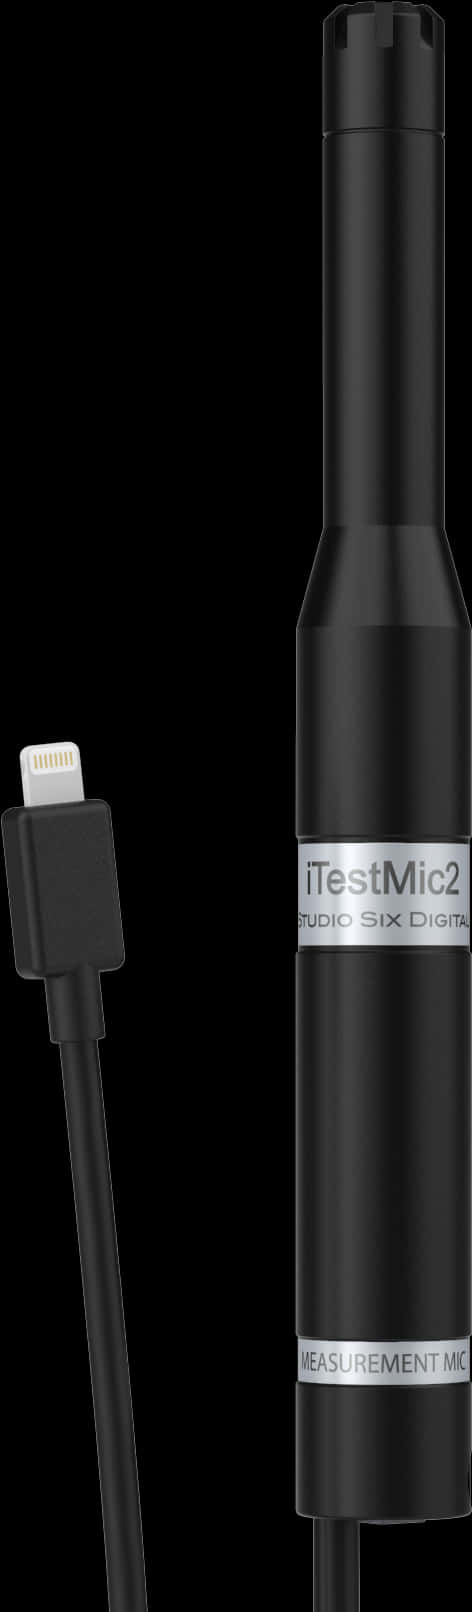 I Test Mic2 Measurement Microphonewith Lightning Connector